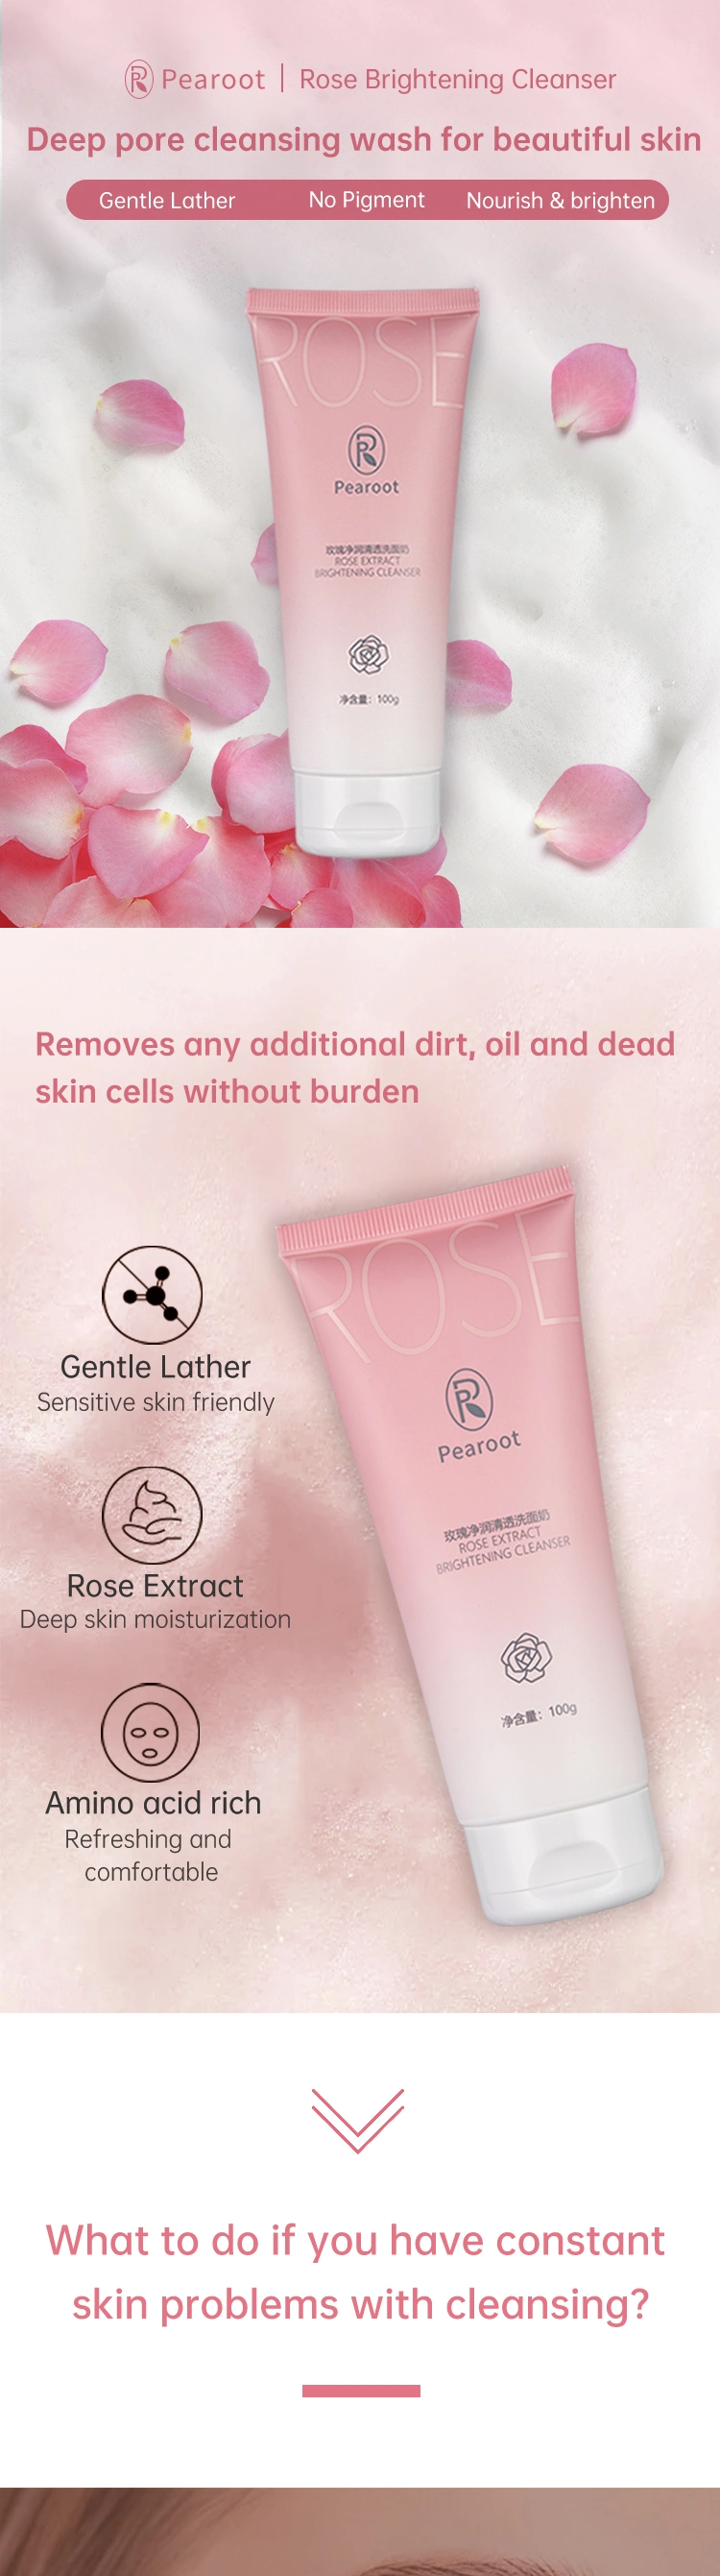 Pearoot Nourish Deep Cleaning Facial Cleanser